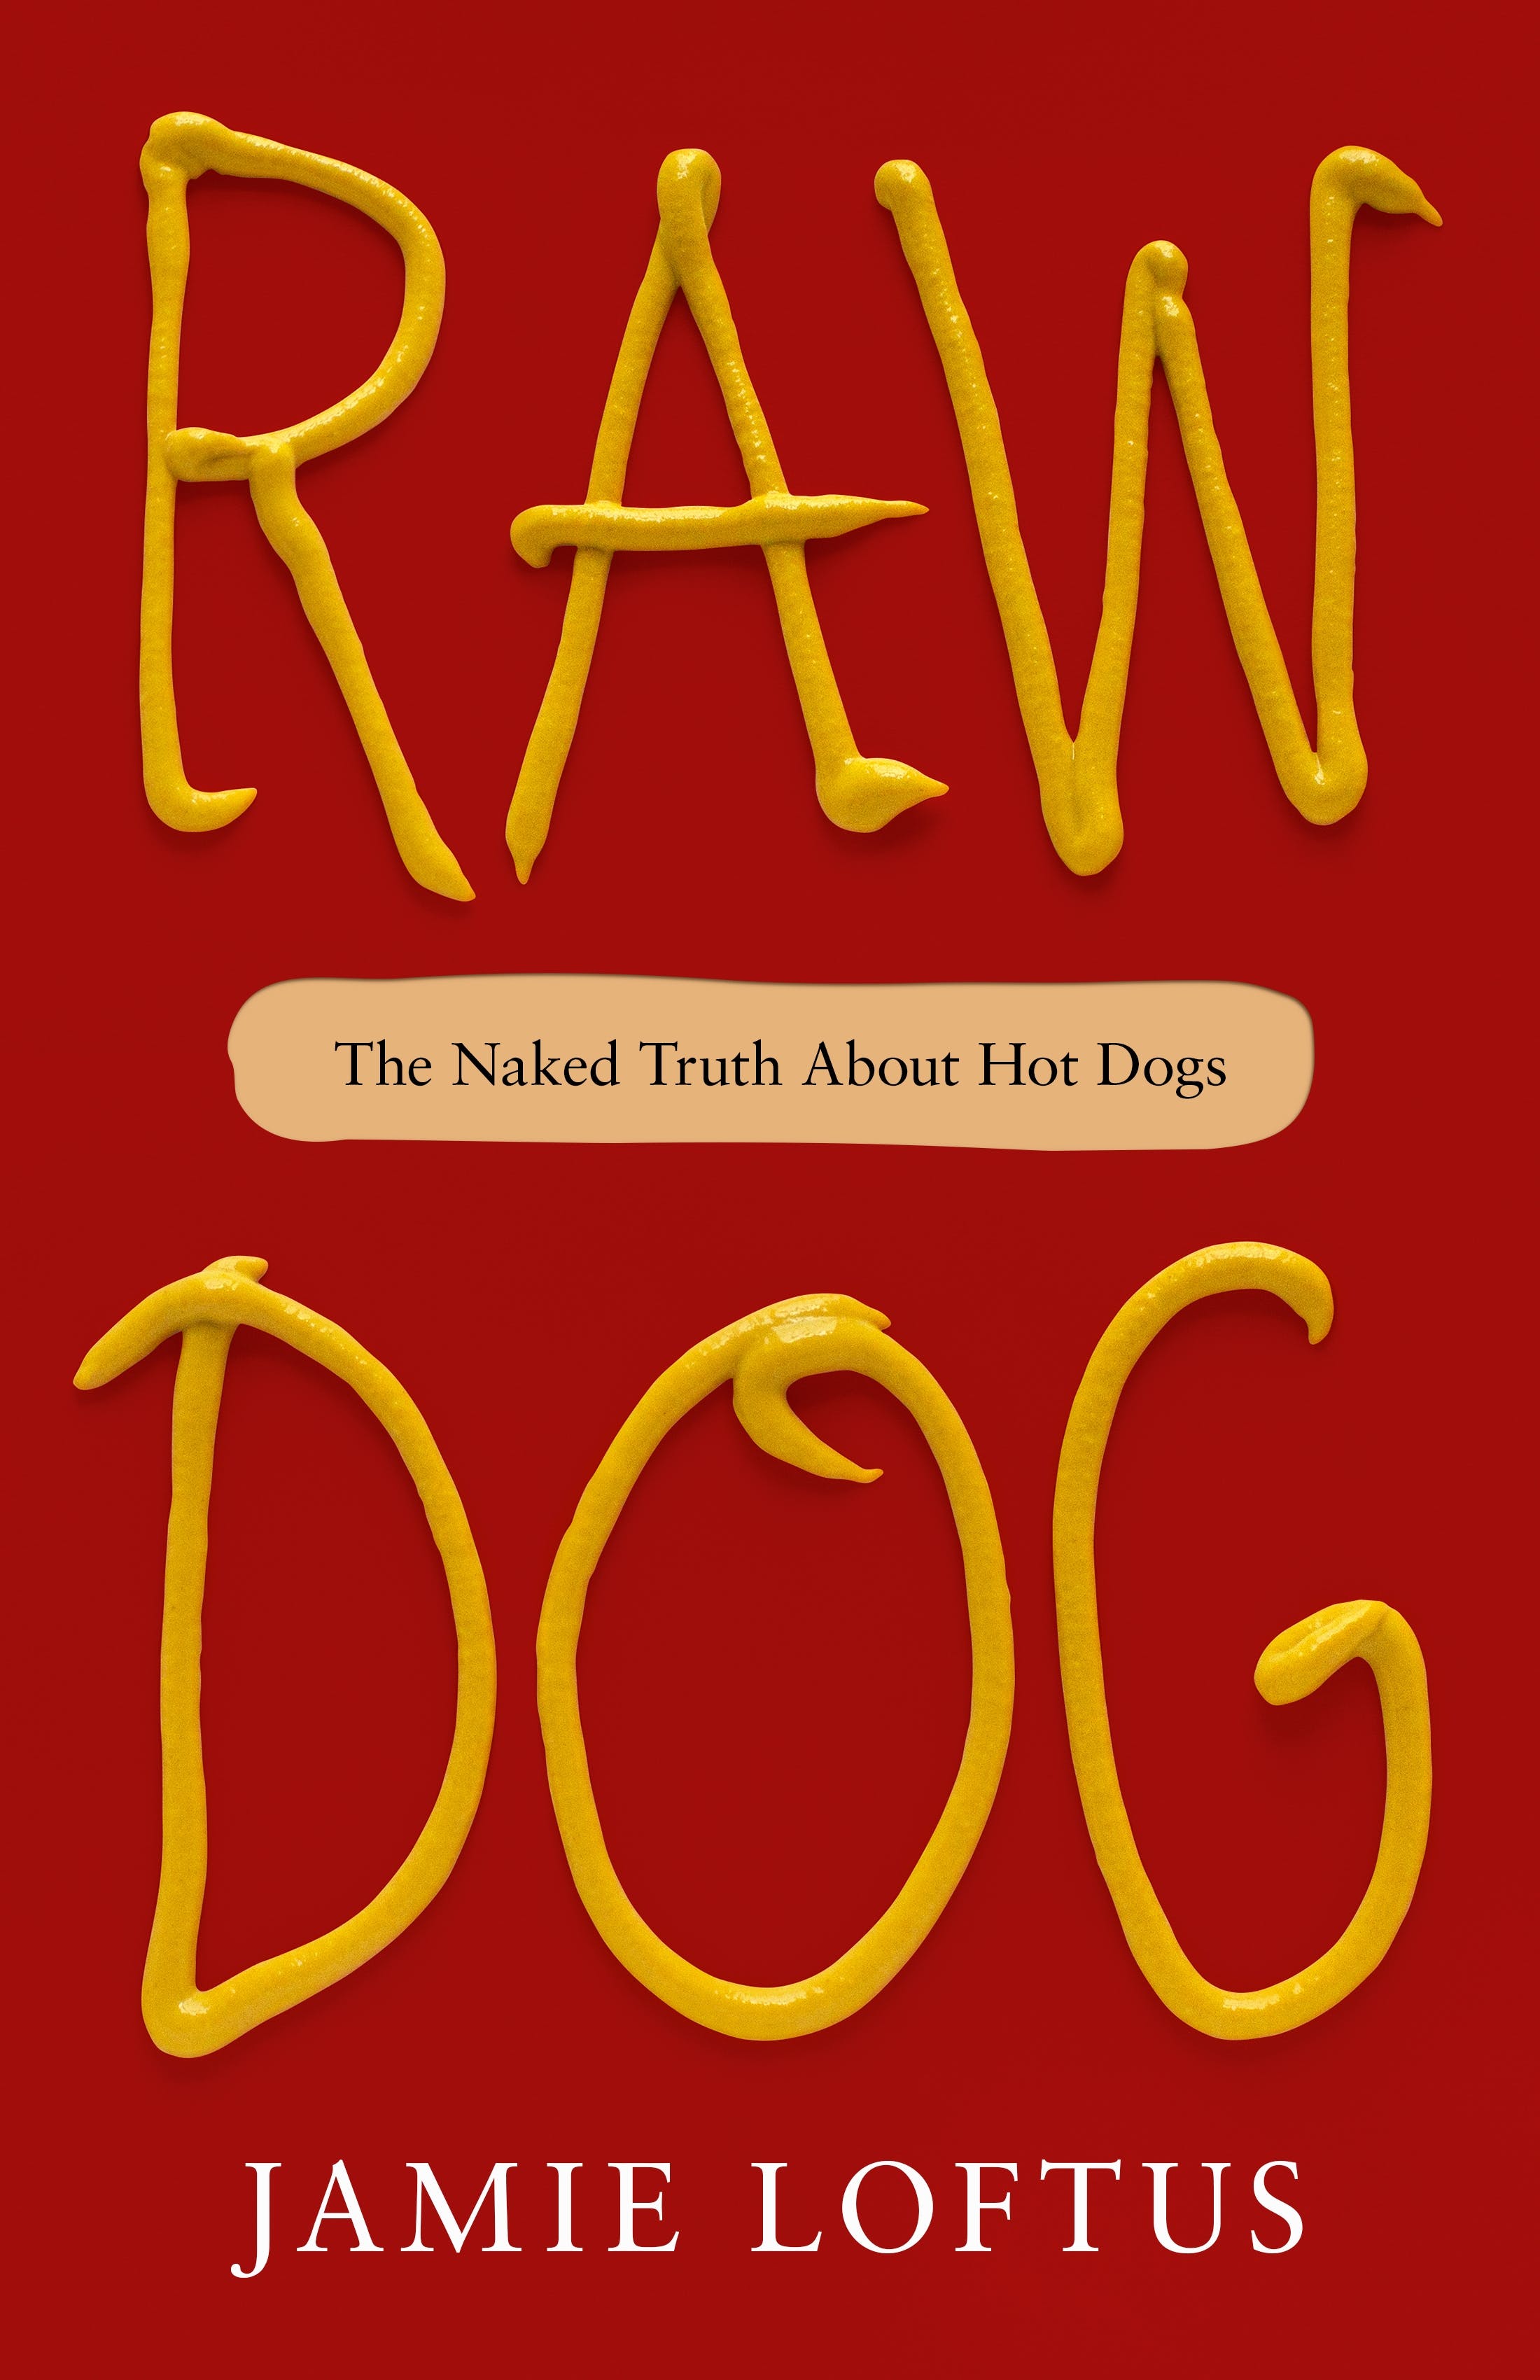 The cover of Raw Dog.